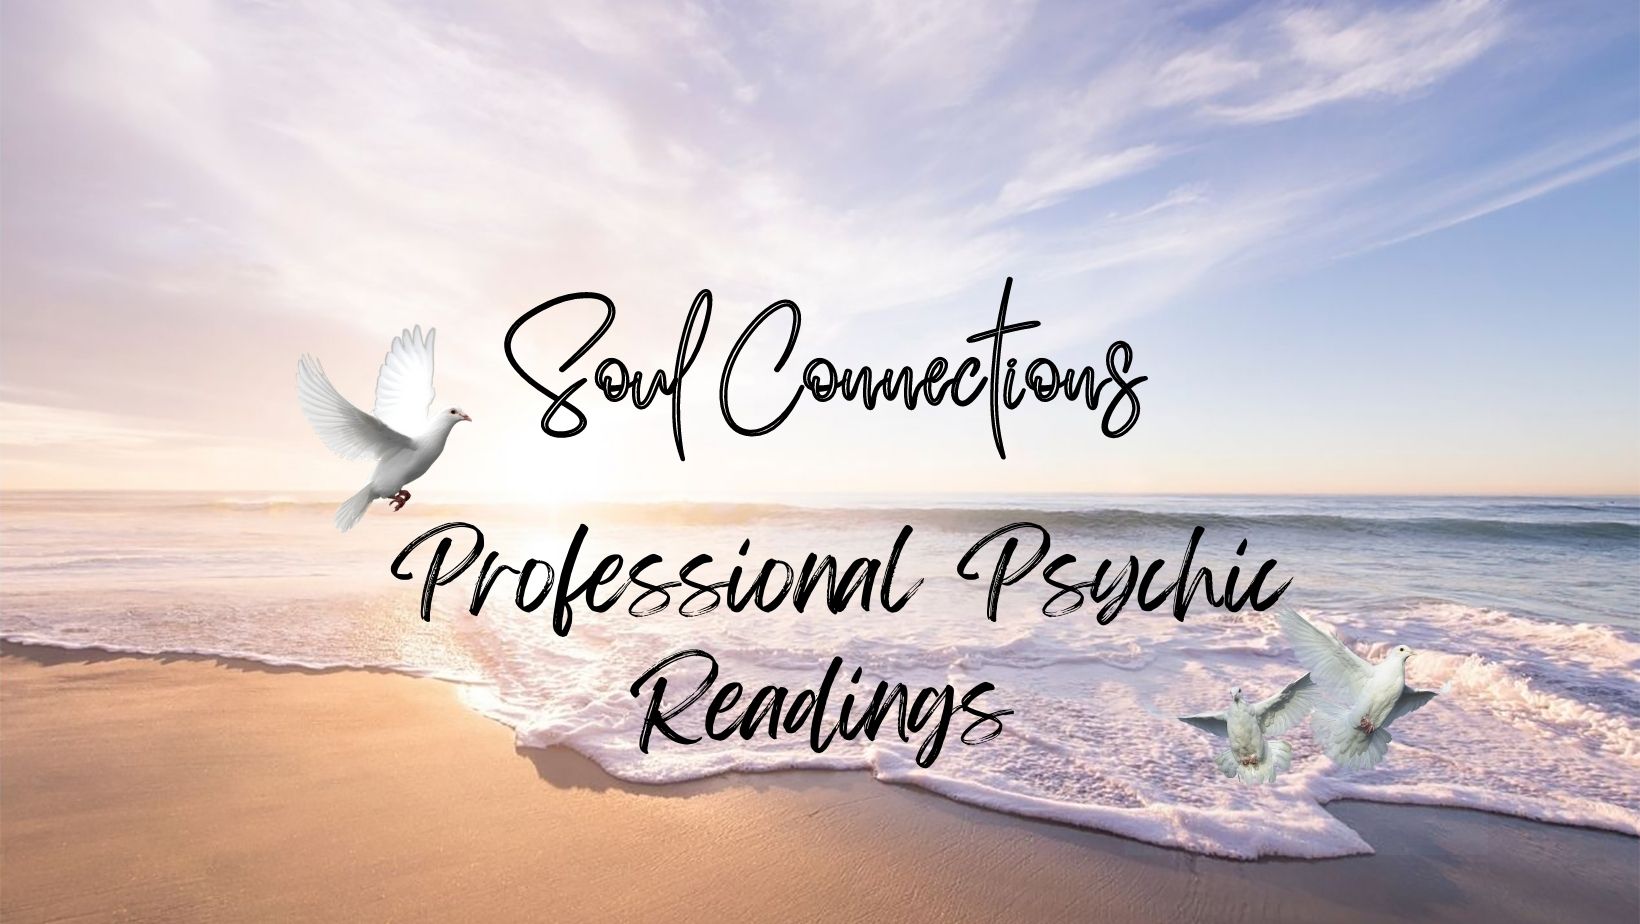 Soul Connection Psychics facebook cover new